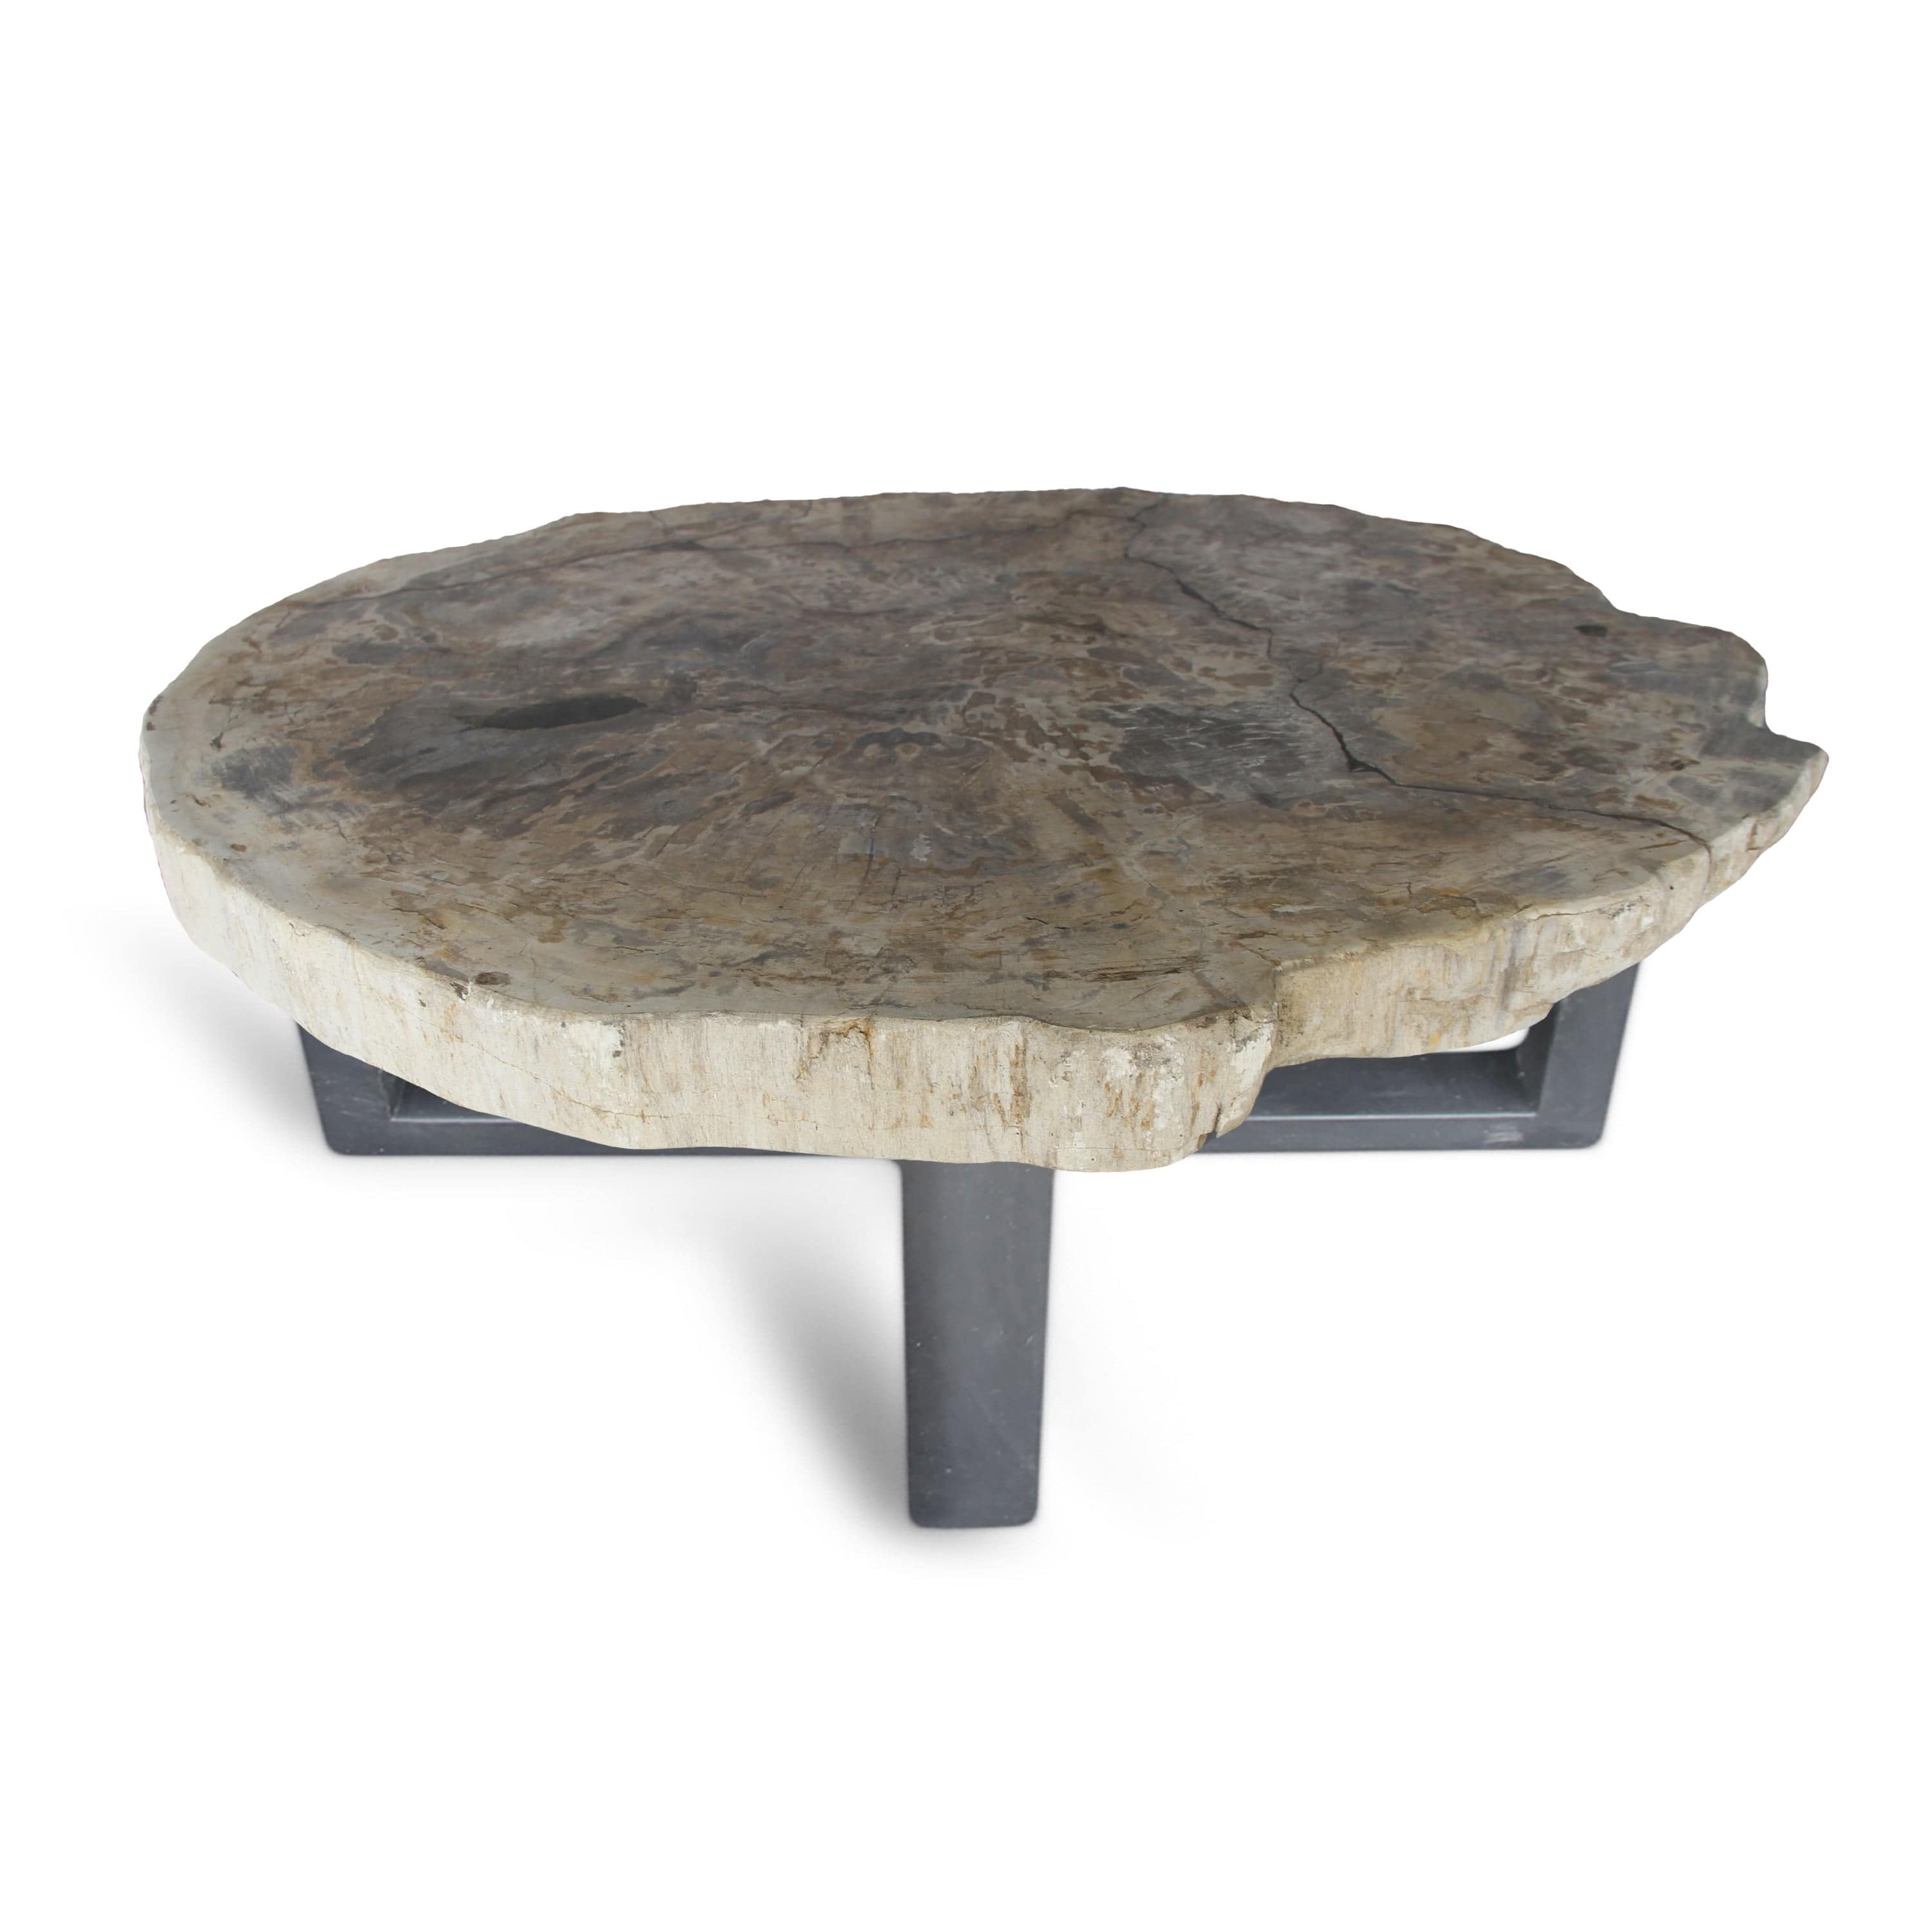 Kalifano Petrified Wood Petrified Wood Round Slab Coffee Table from Indonesia - 35" / 143 lbs PWT5200.004